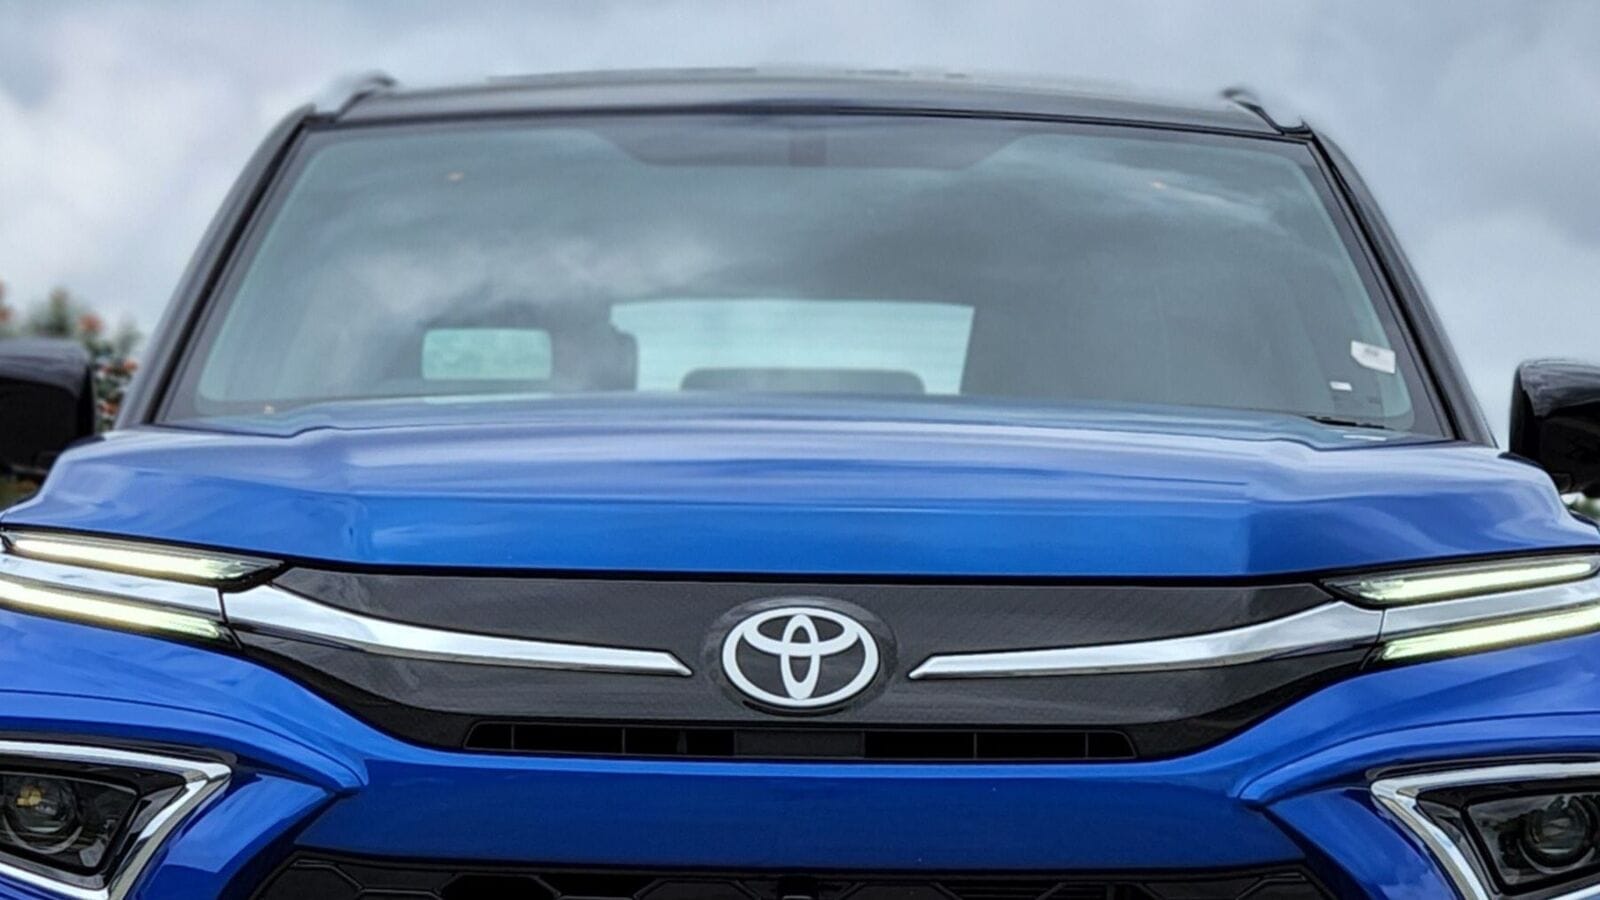 Toyota recalls nearly 1,400 Glanza, HyRyder due to airbag defect: Report